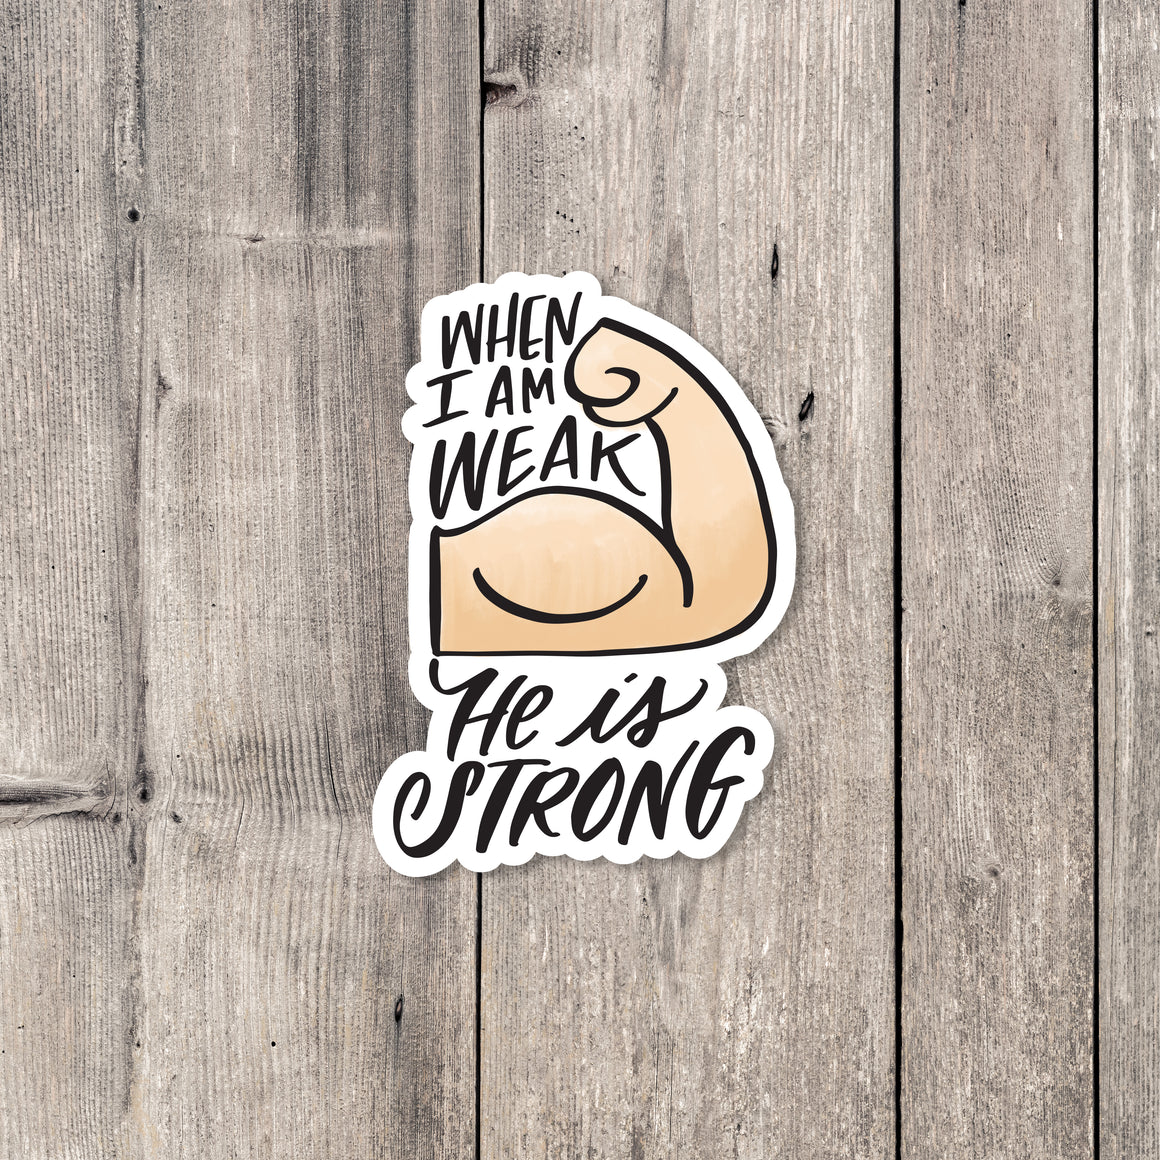 "He is Strong" sticker